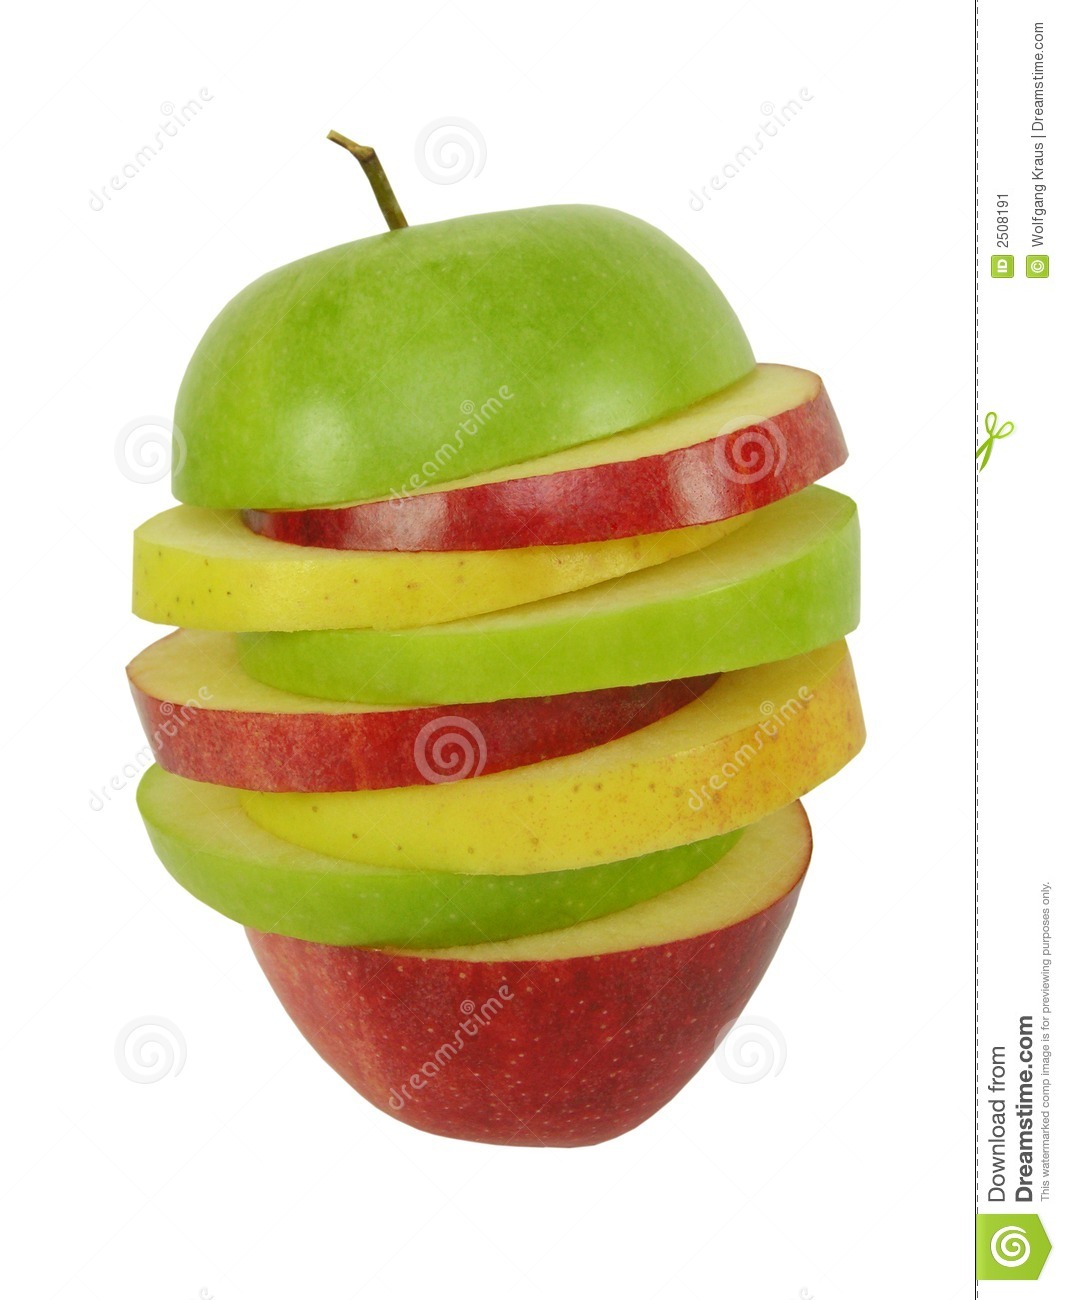 Apple Slices Clipart Mixed Apple Slices Isolated